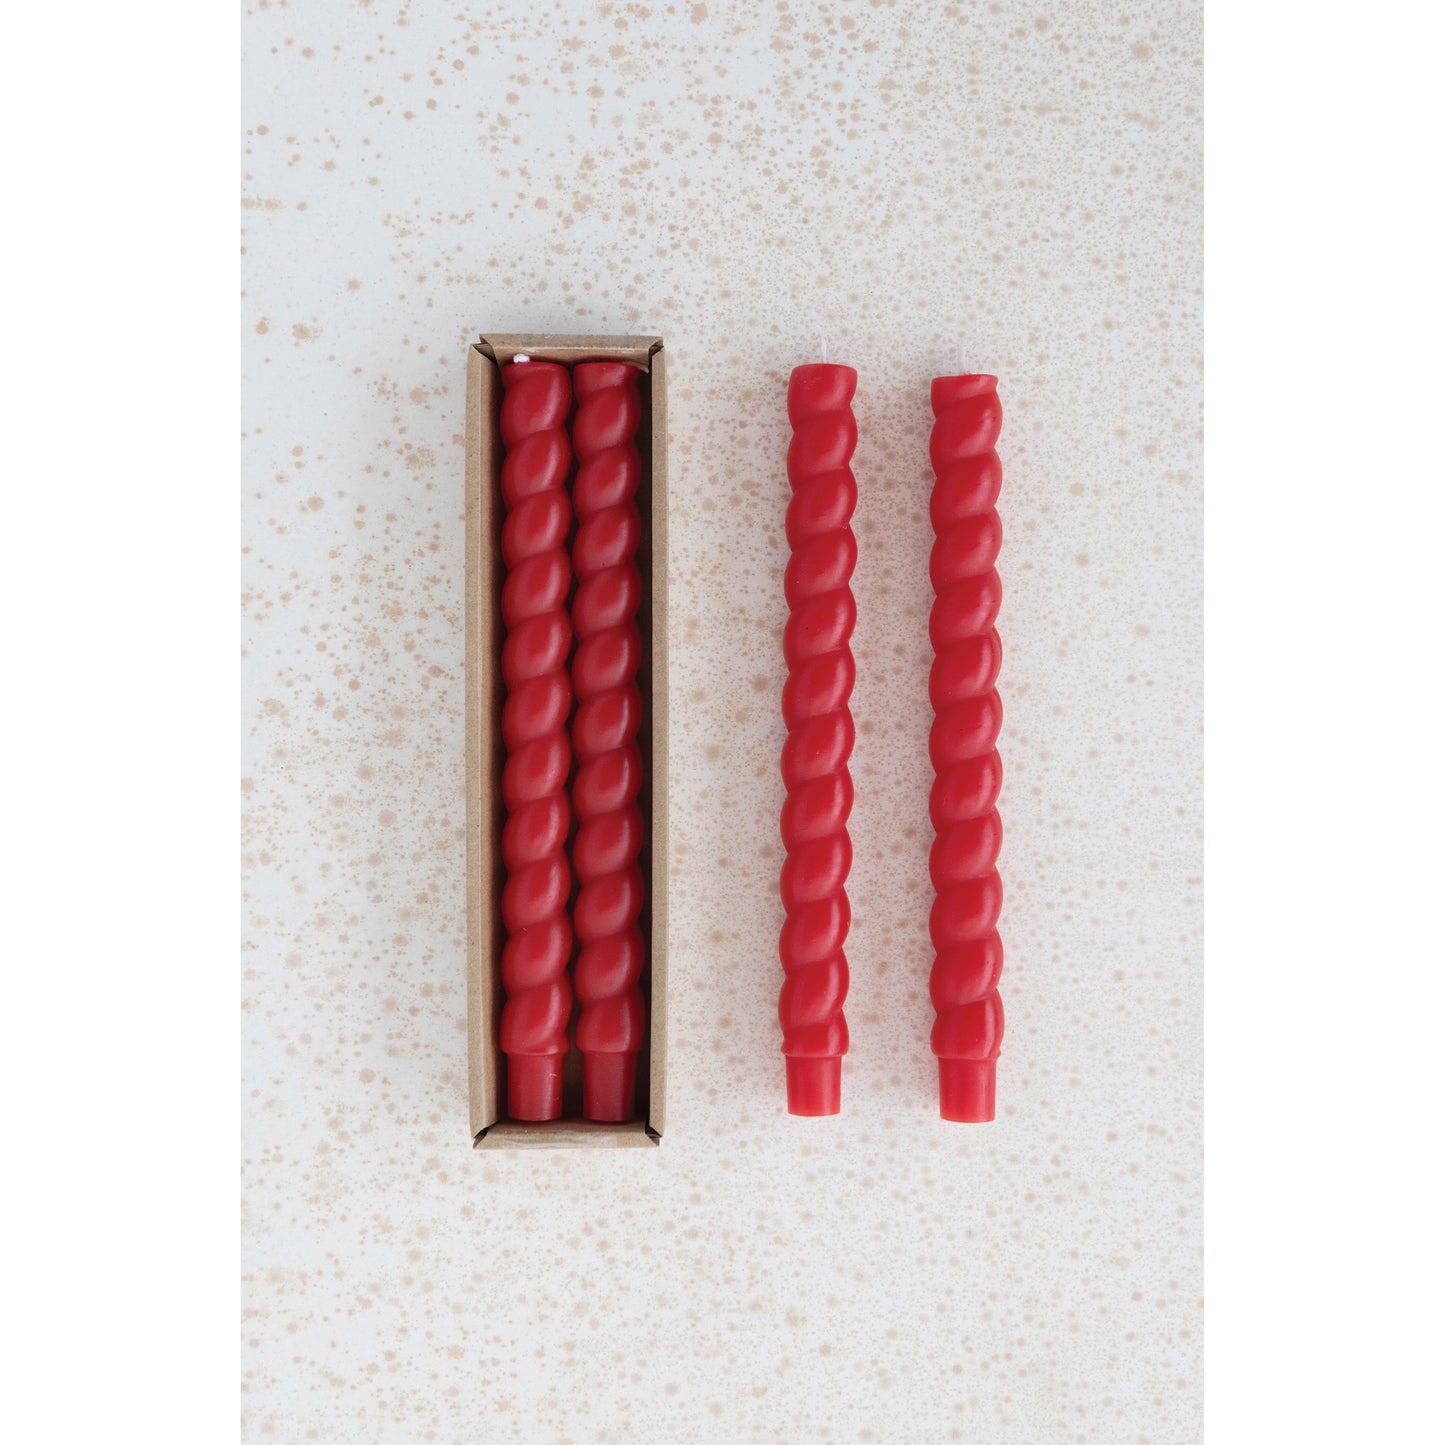 red taper candles with a twisted design.